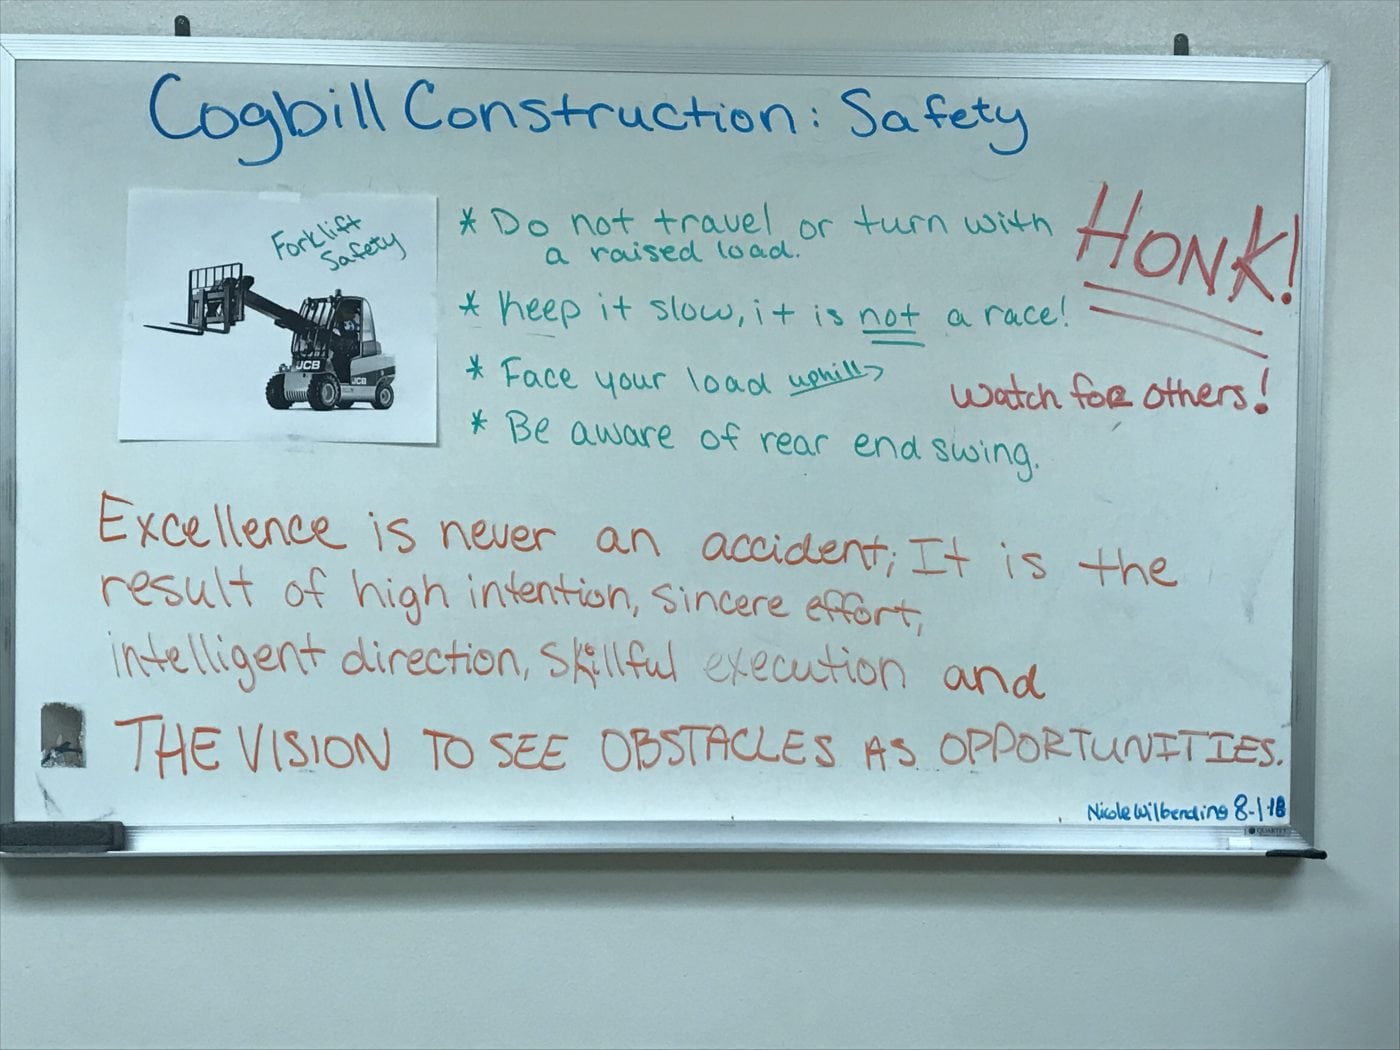 Forklift Safety: Cogbill Construction